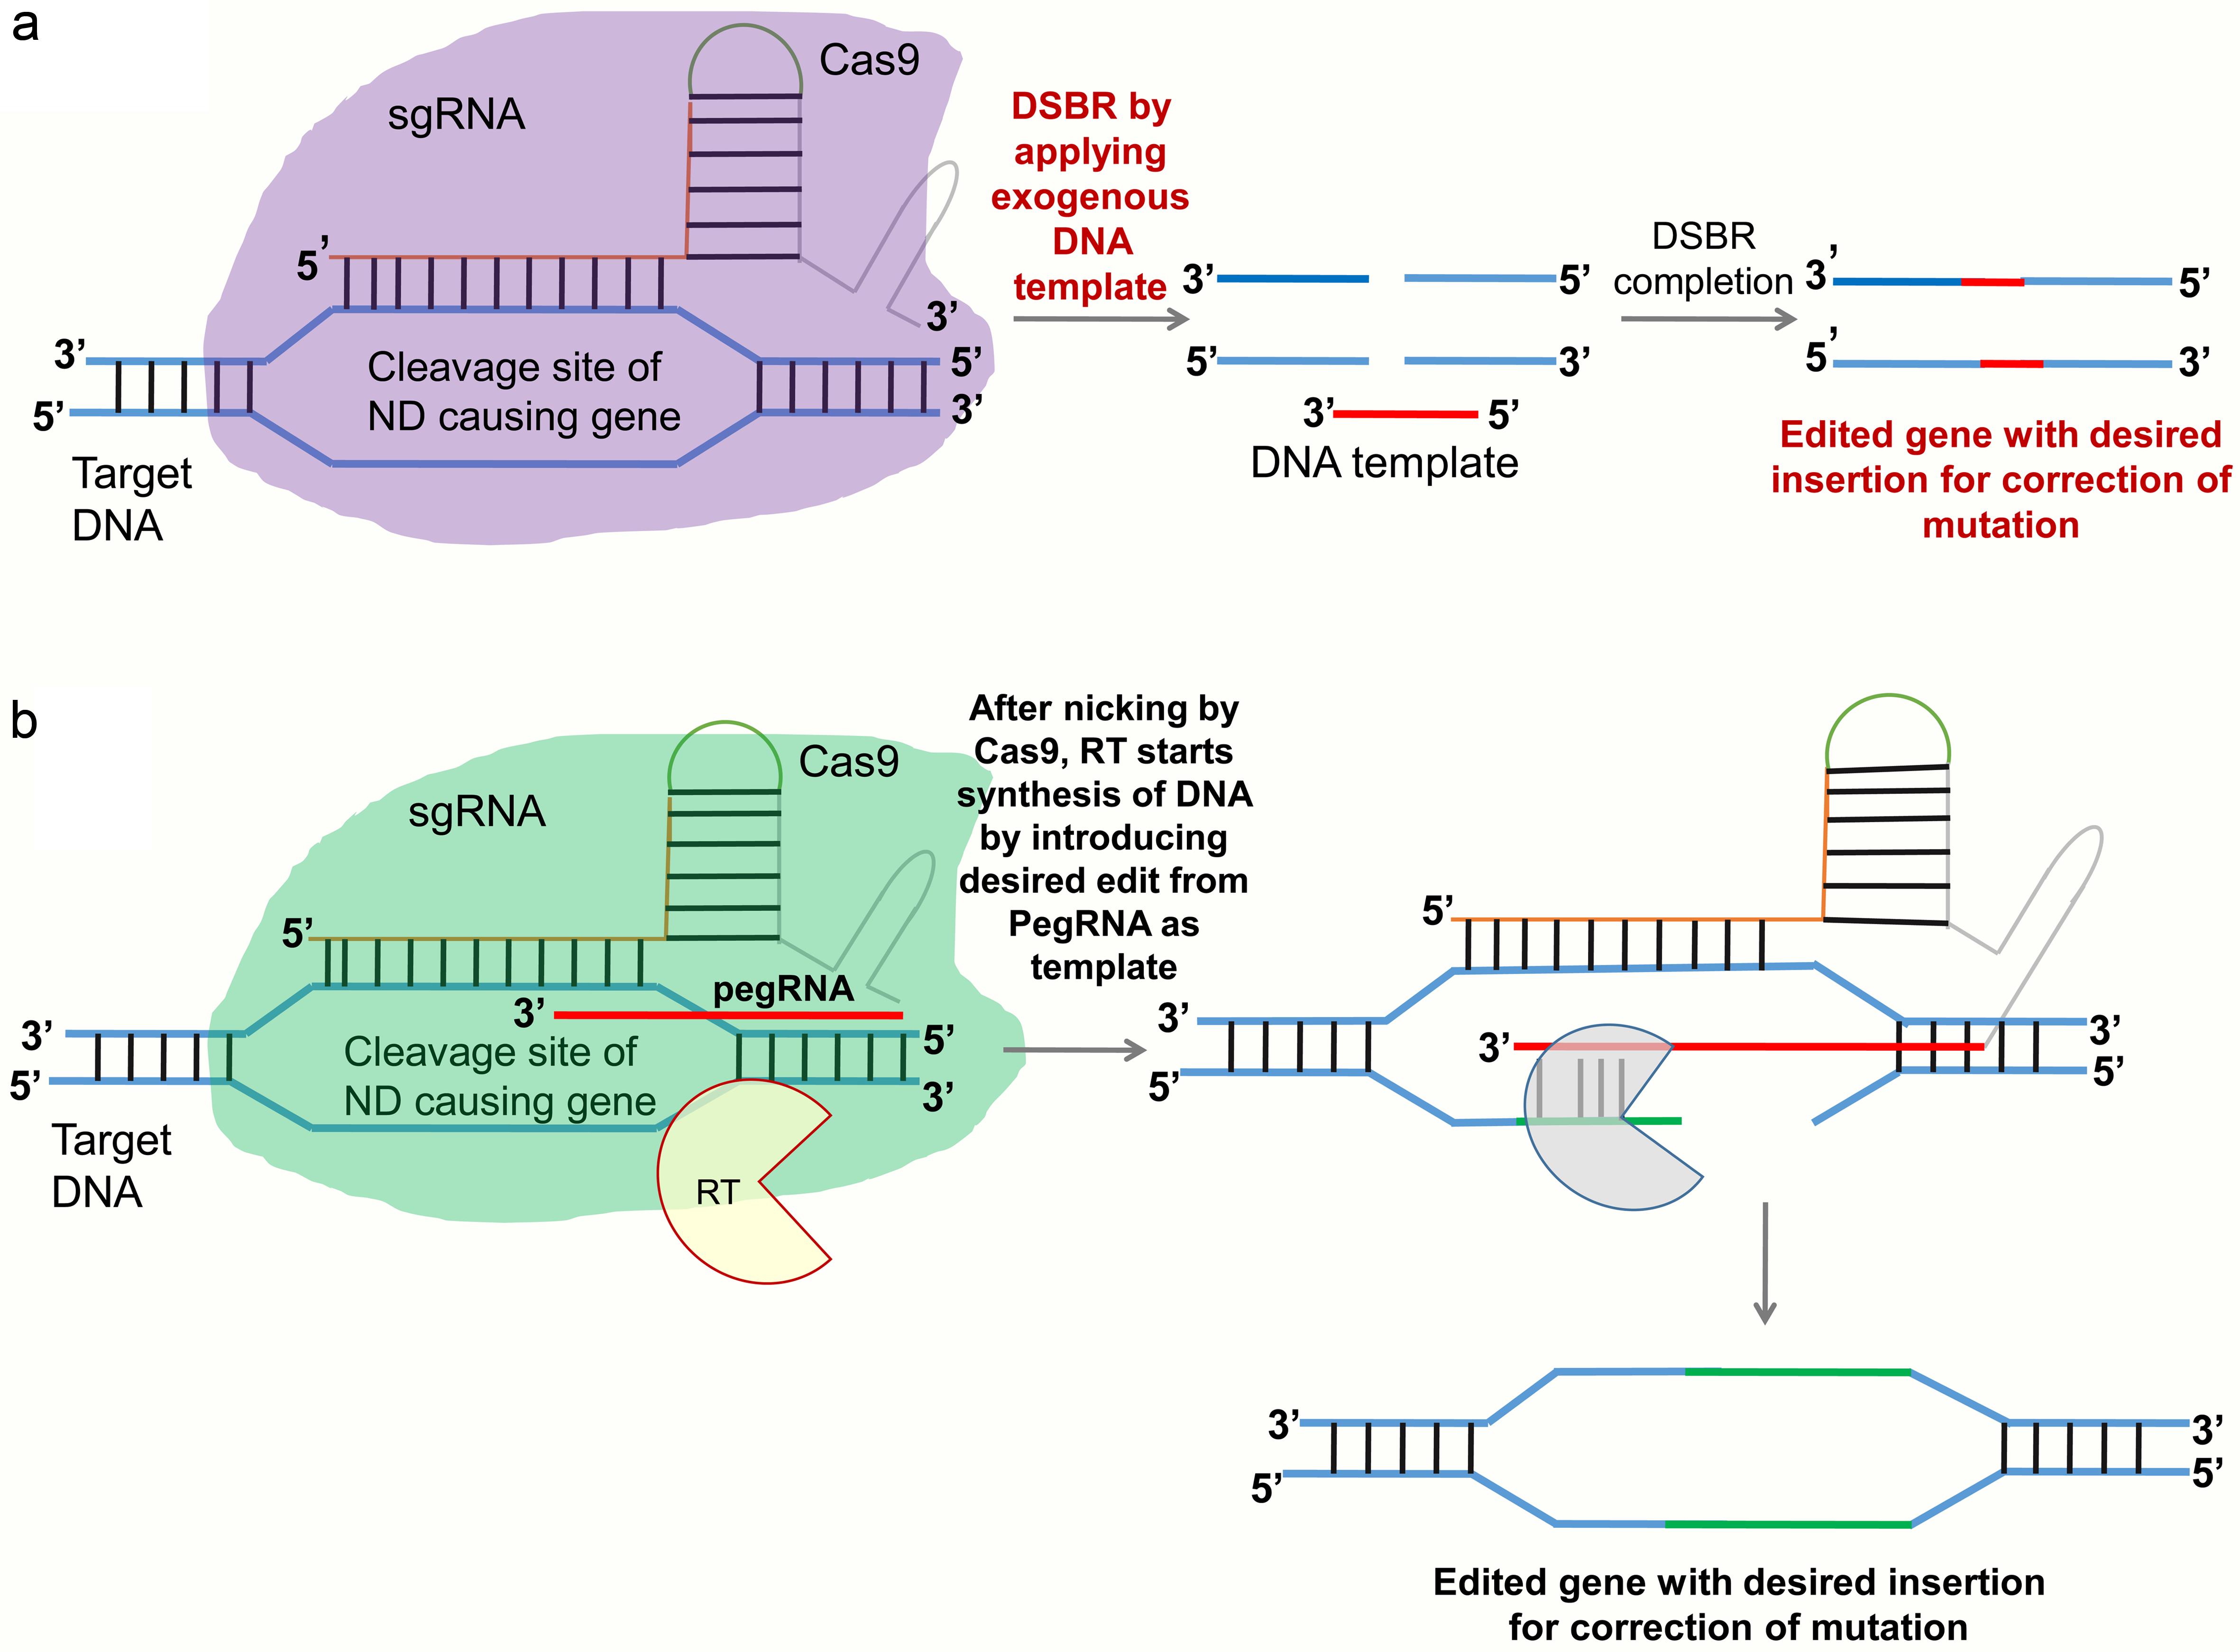 General overview of the advanced CRISPR/Cas9 gene-editing tools.